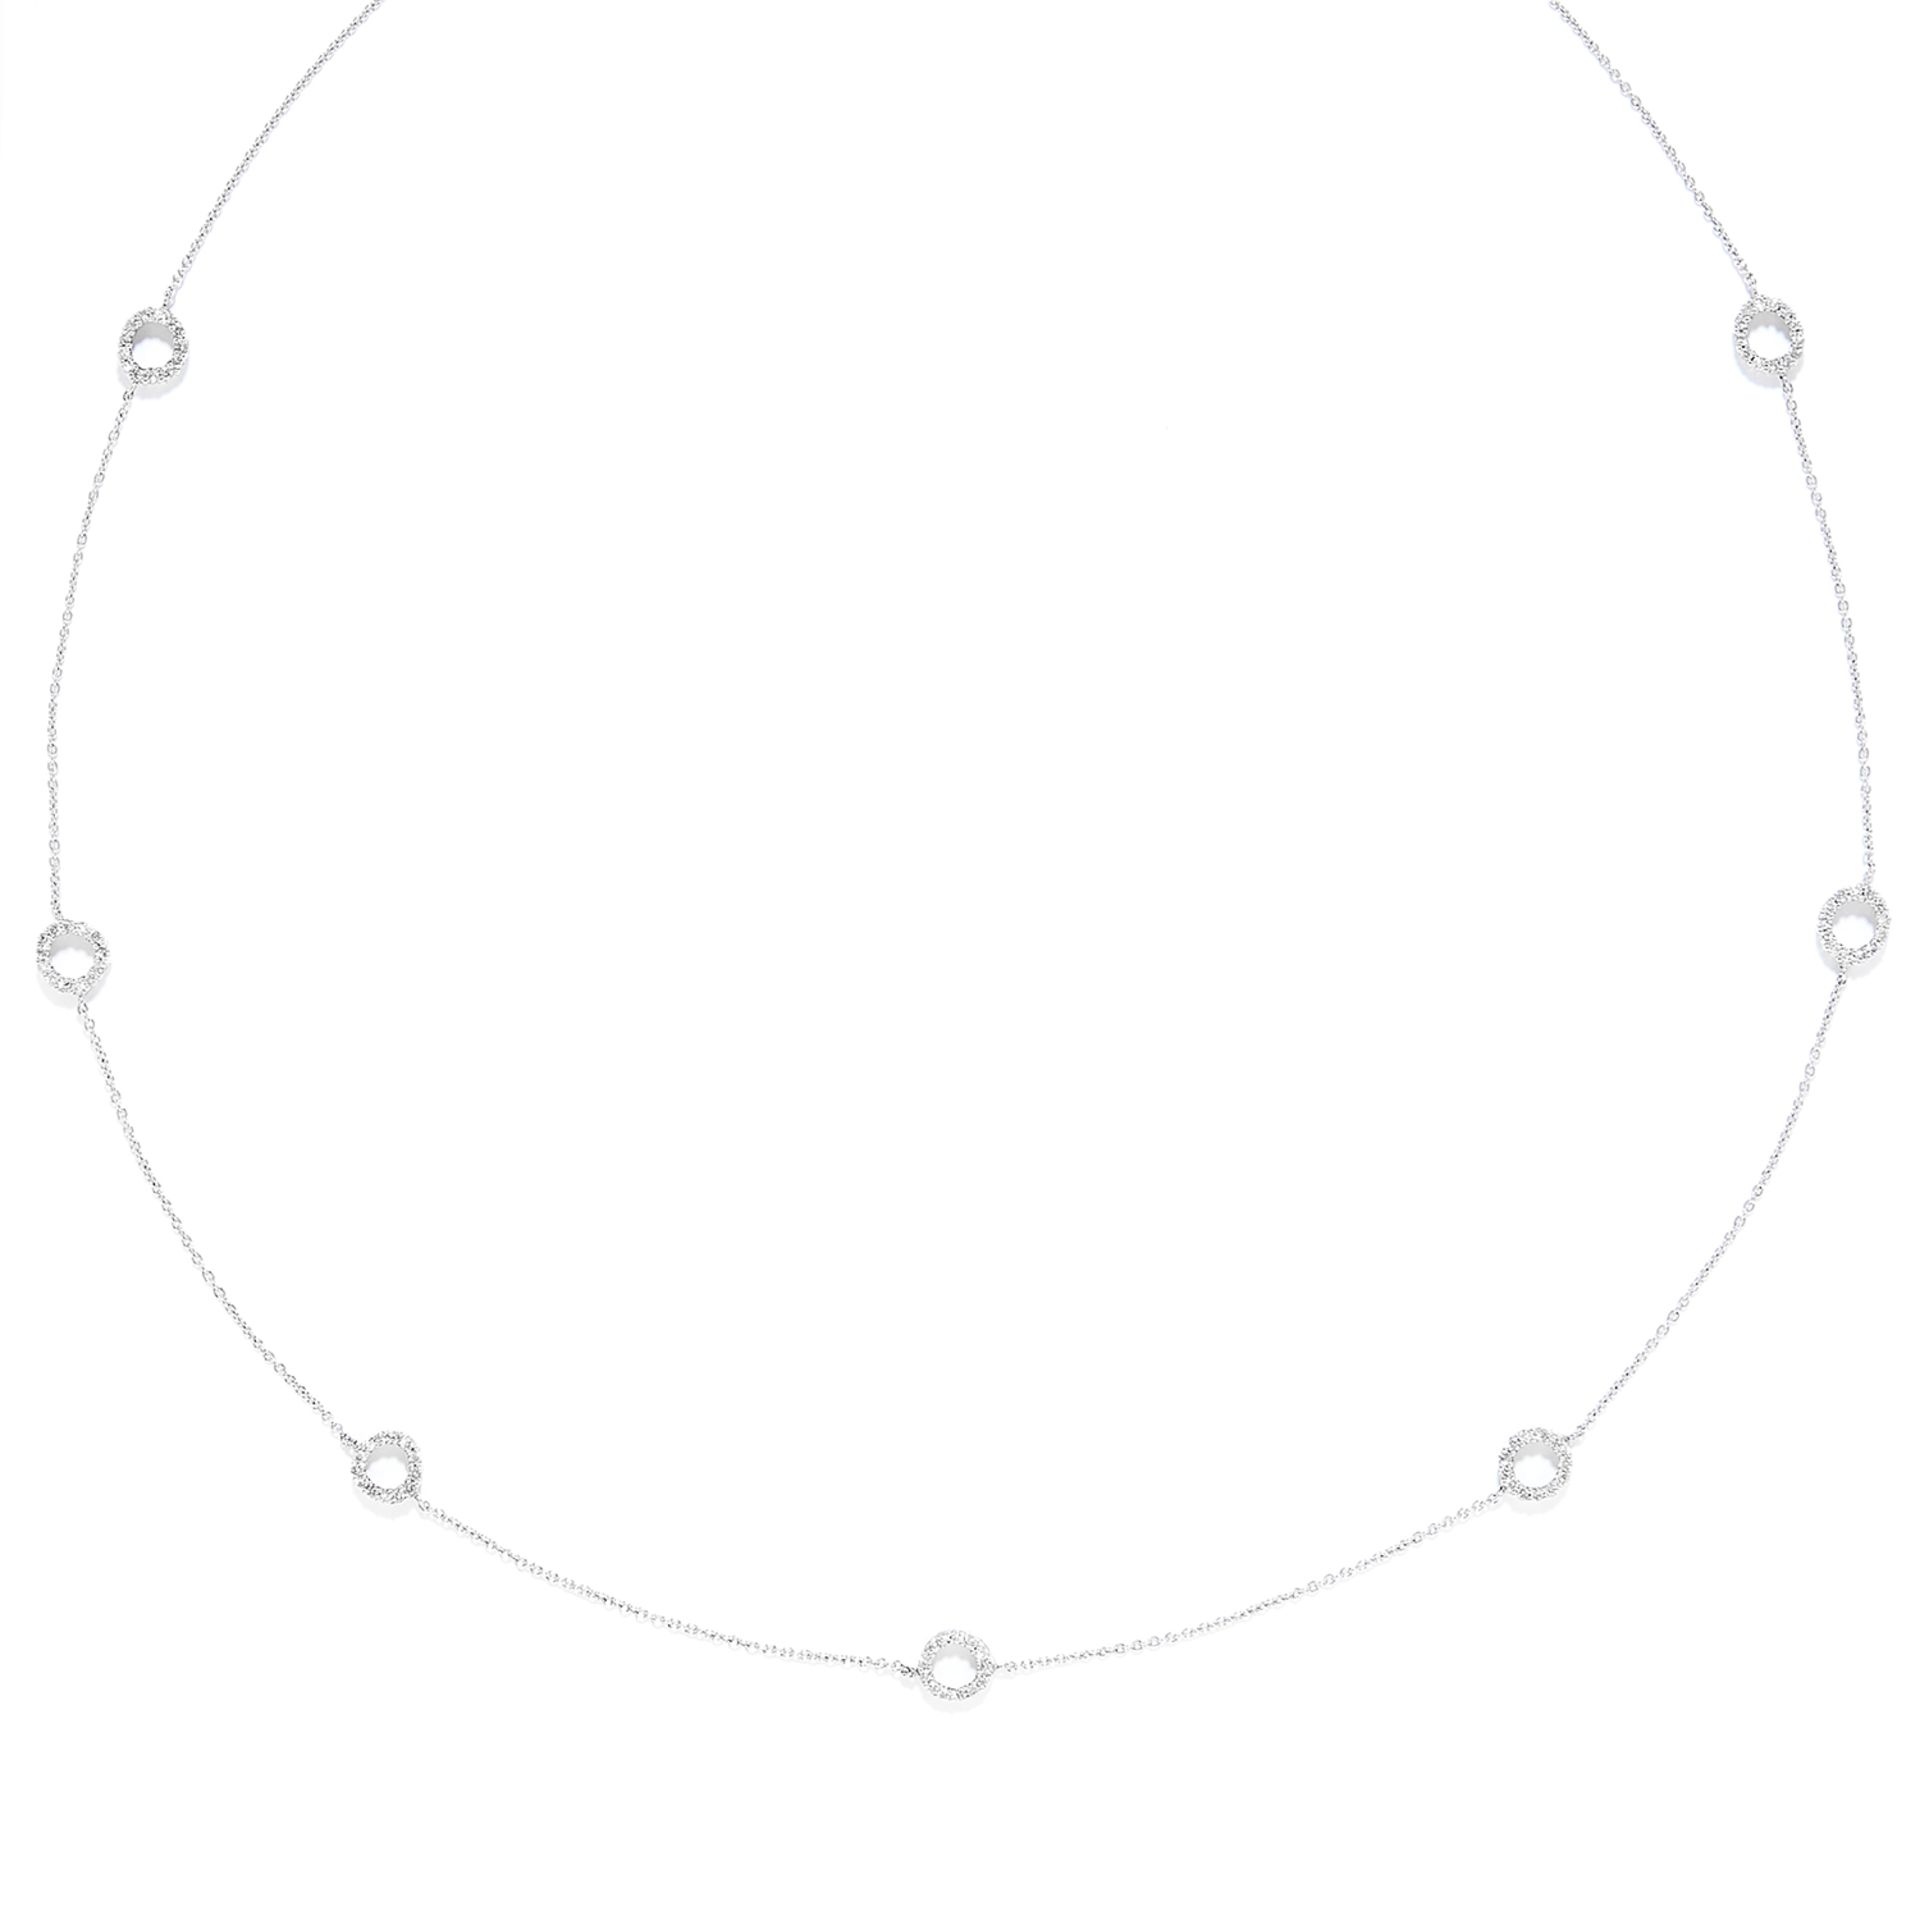 DIAMOND LONGCHAIN NECKLACE in white gold or platinum, comprising of chain and circular links set